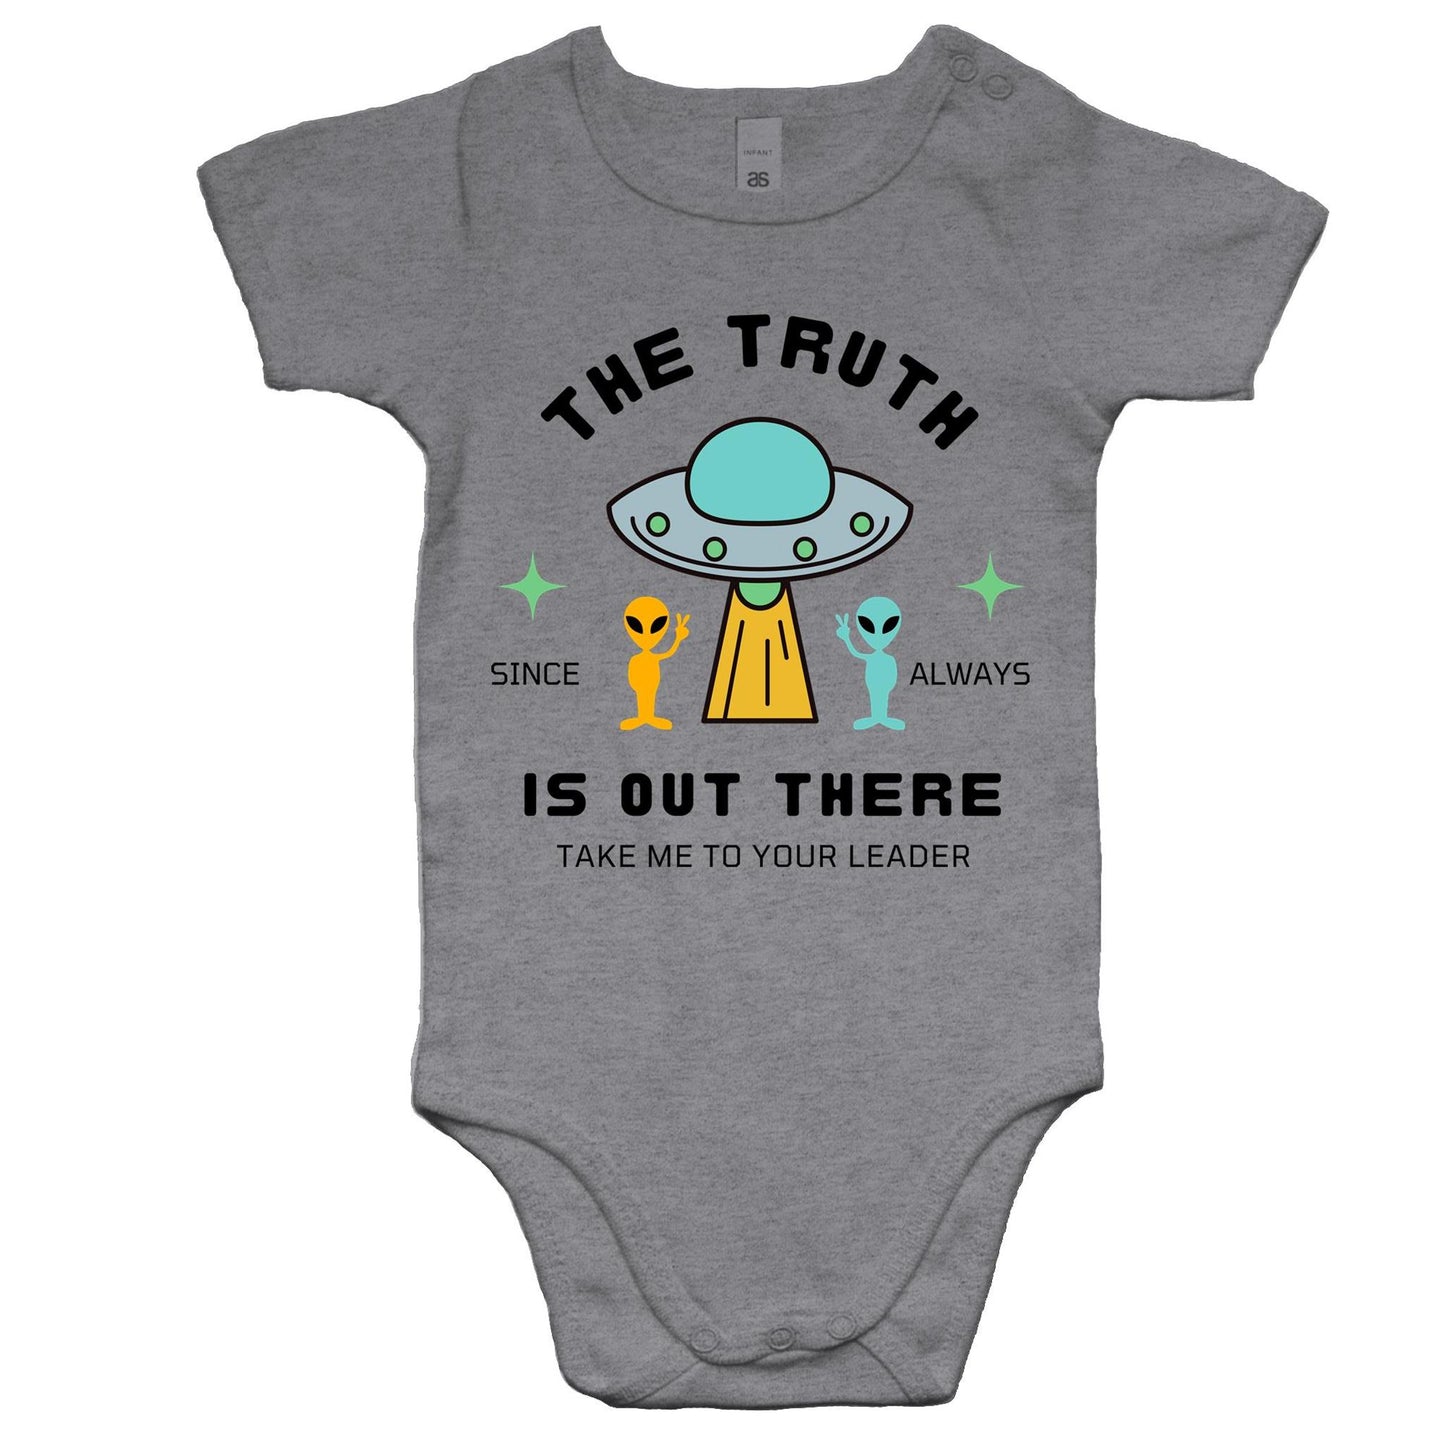 The Truth Is Out There - Baby Bodysuit Grey Marle Baby Bodysuit Sci Fi